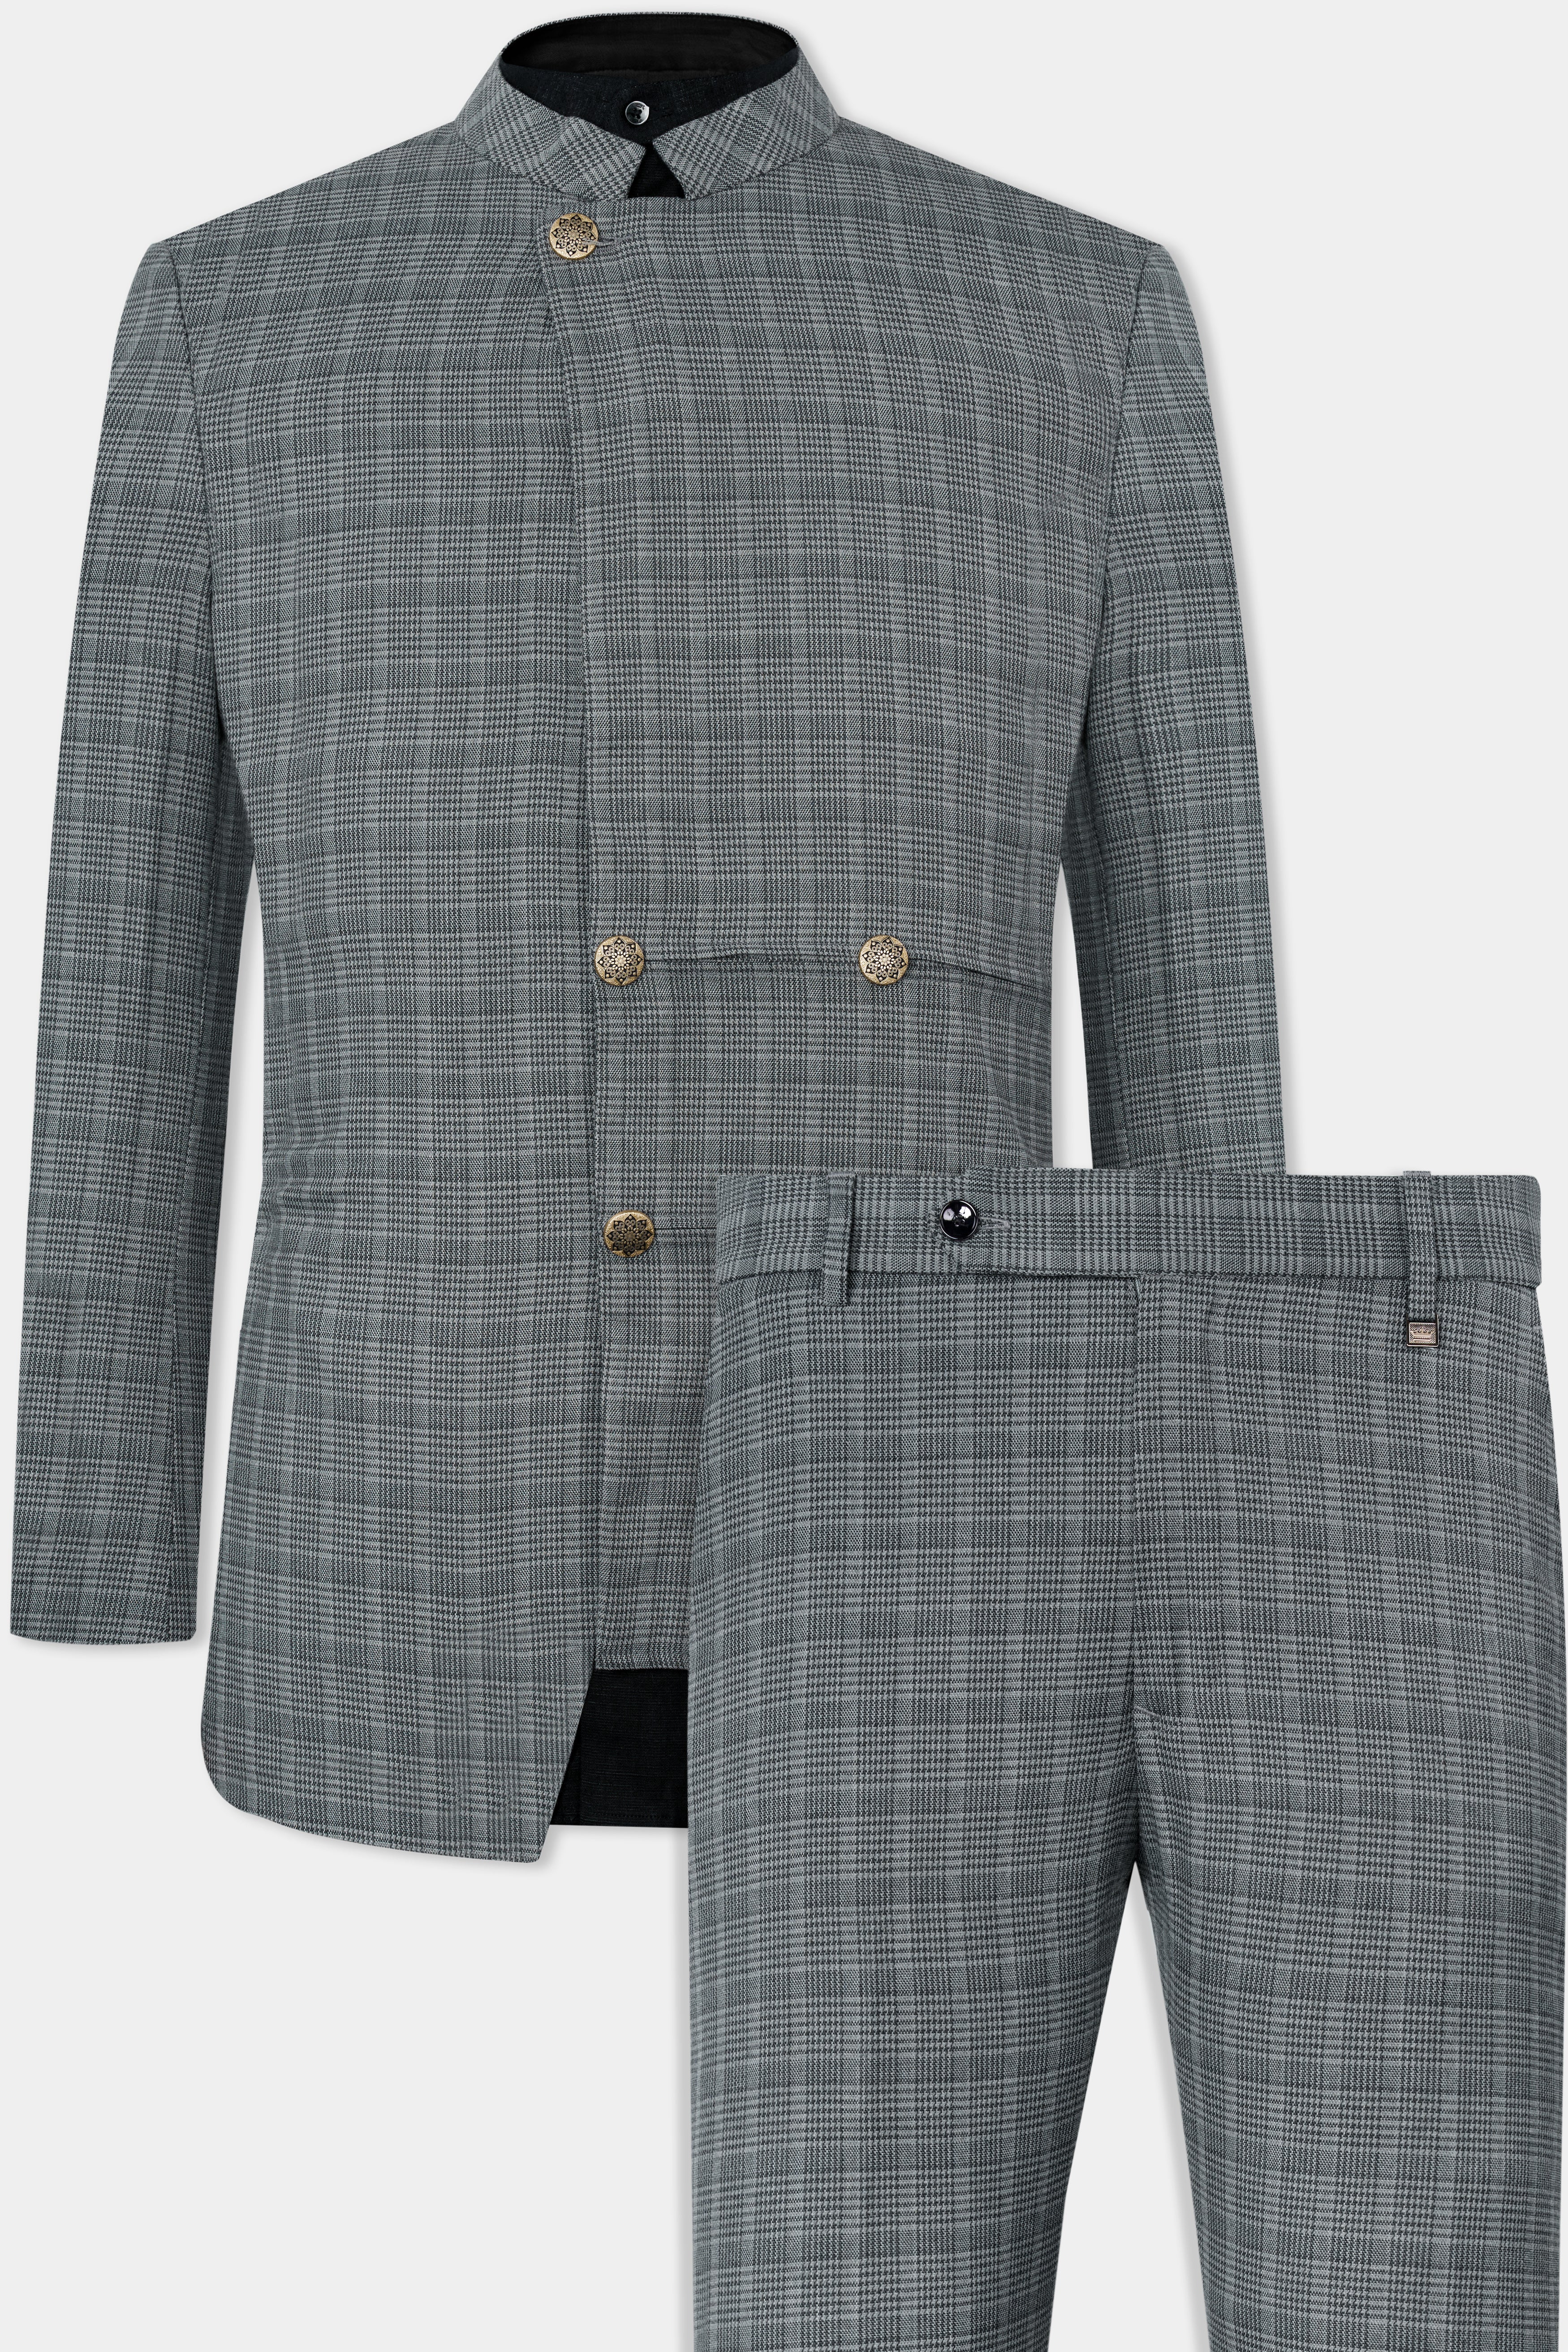 Oslo Gray Checkered Wool Rich Bandhgala Designer Stretchable traveler Suit ST2801-D38-36, ST2801-D38-38, ST2801-D38-40, ST2801-D38-42, ST2801-D38-44, ST2801-D38-46, ST2801-D38-48, ST2801-D38-50, ST2801-D38-52, ST2801-D38-54, ST2801-D38-56, ST2801-D38-58, ST2801-D38-60